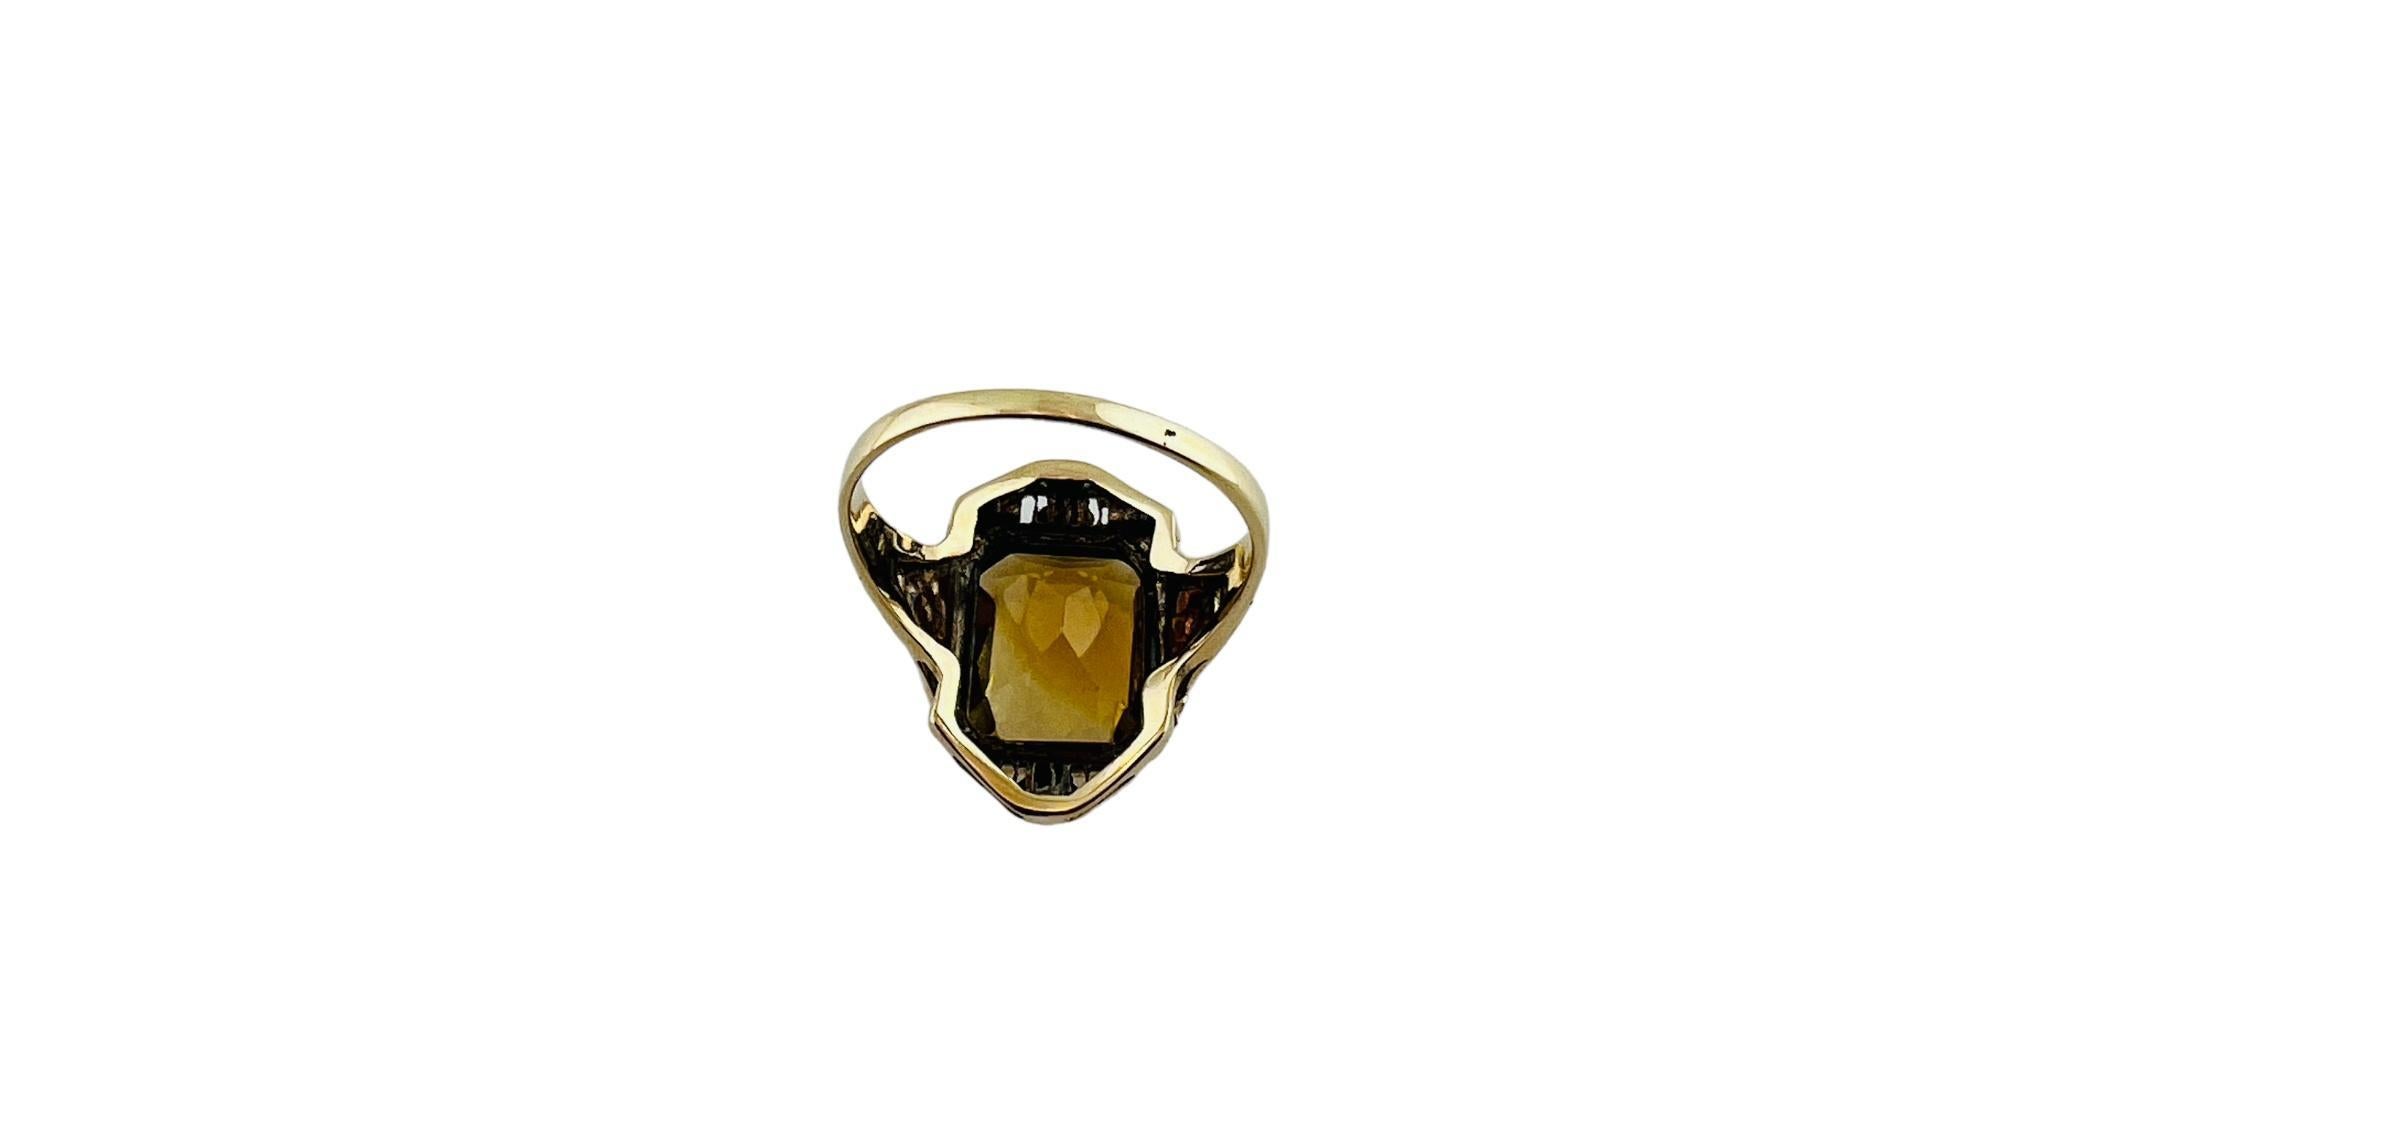 10K Yellow Gold Orange Citrine Filigree Ring #15992 In Good Condition For Sale In Washington Depot, CT